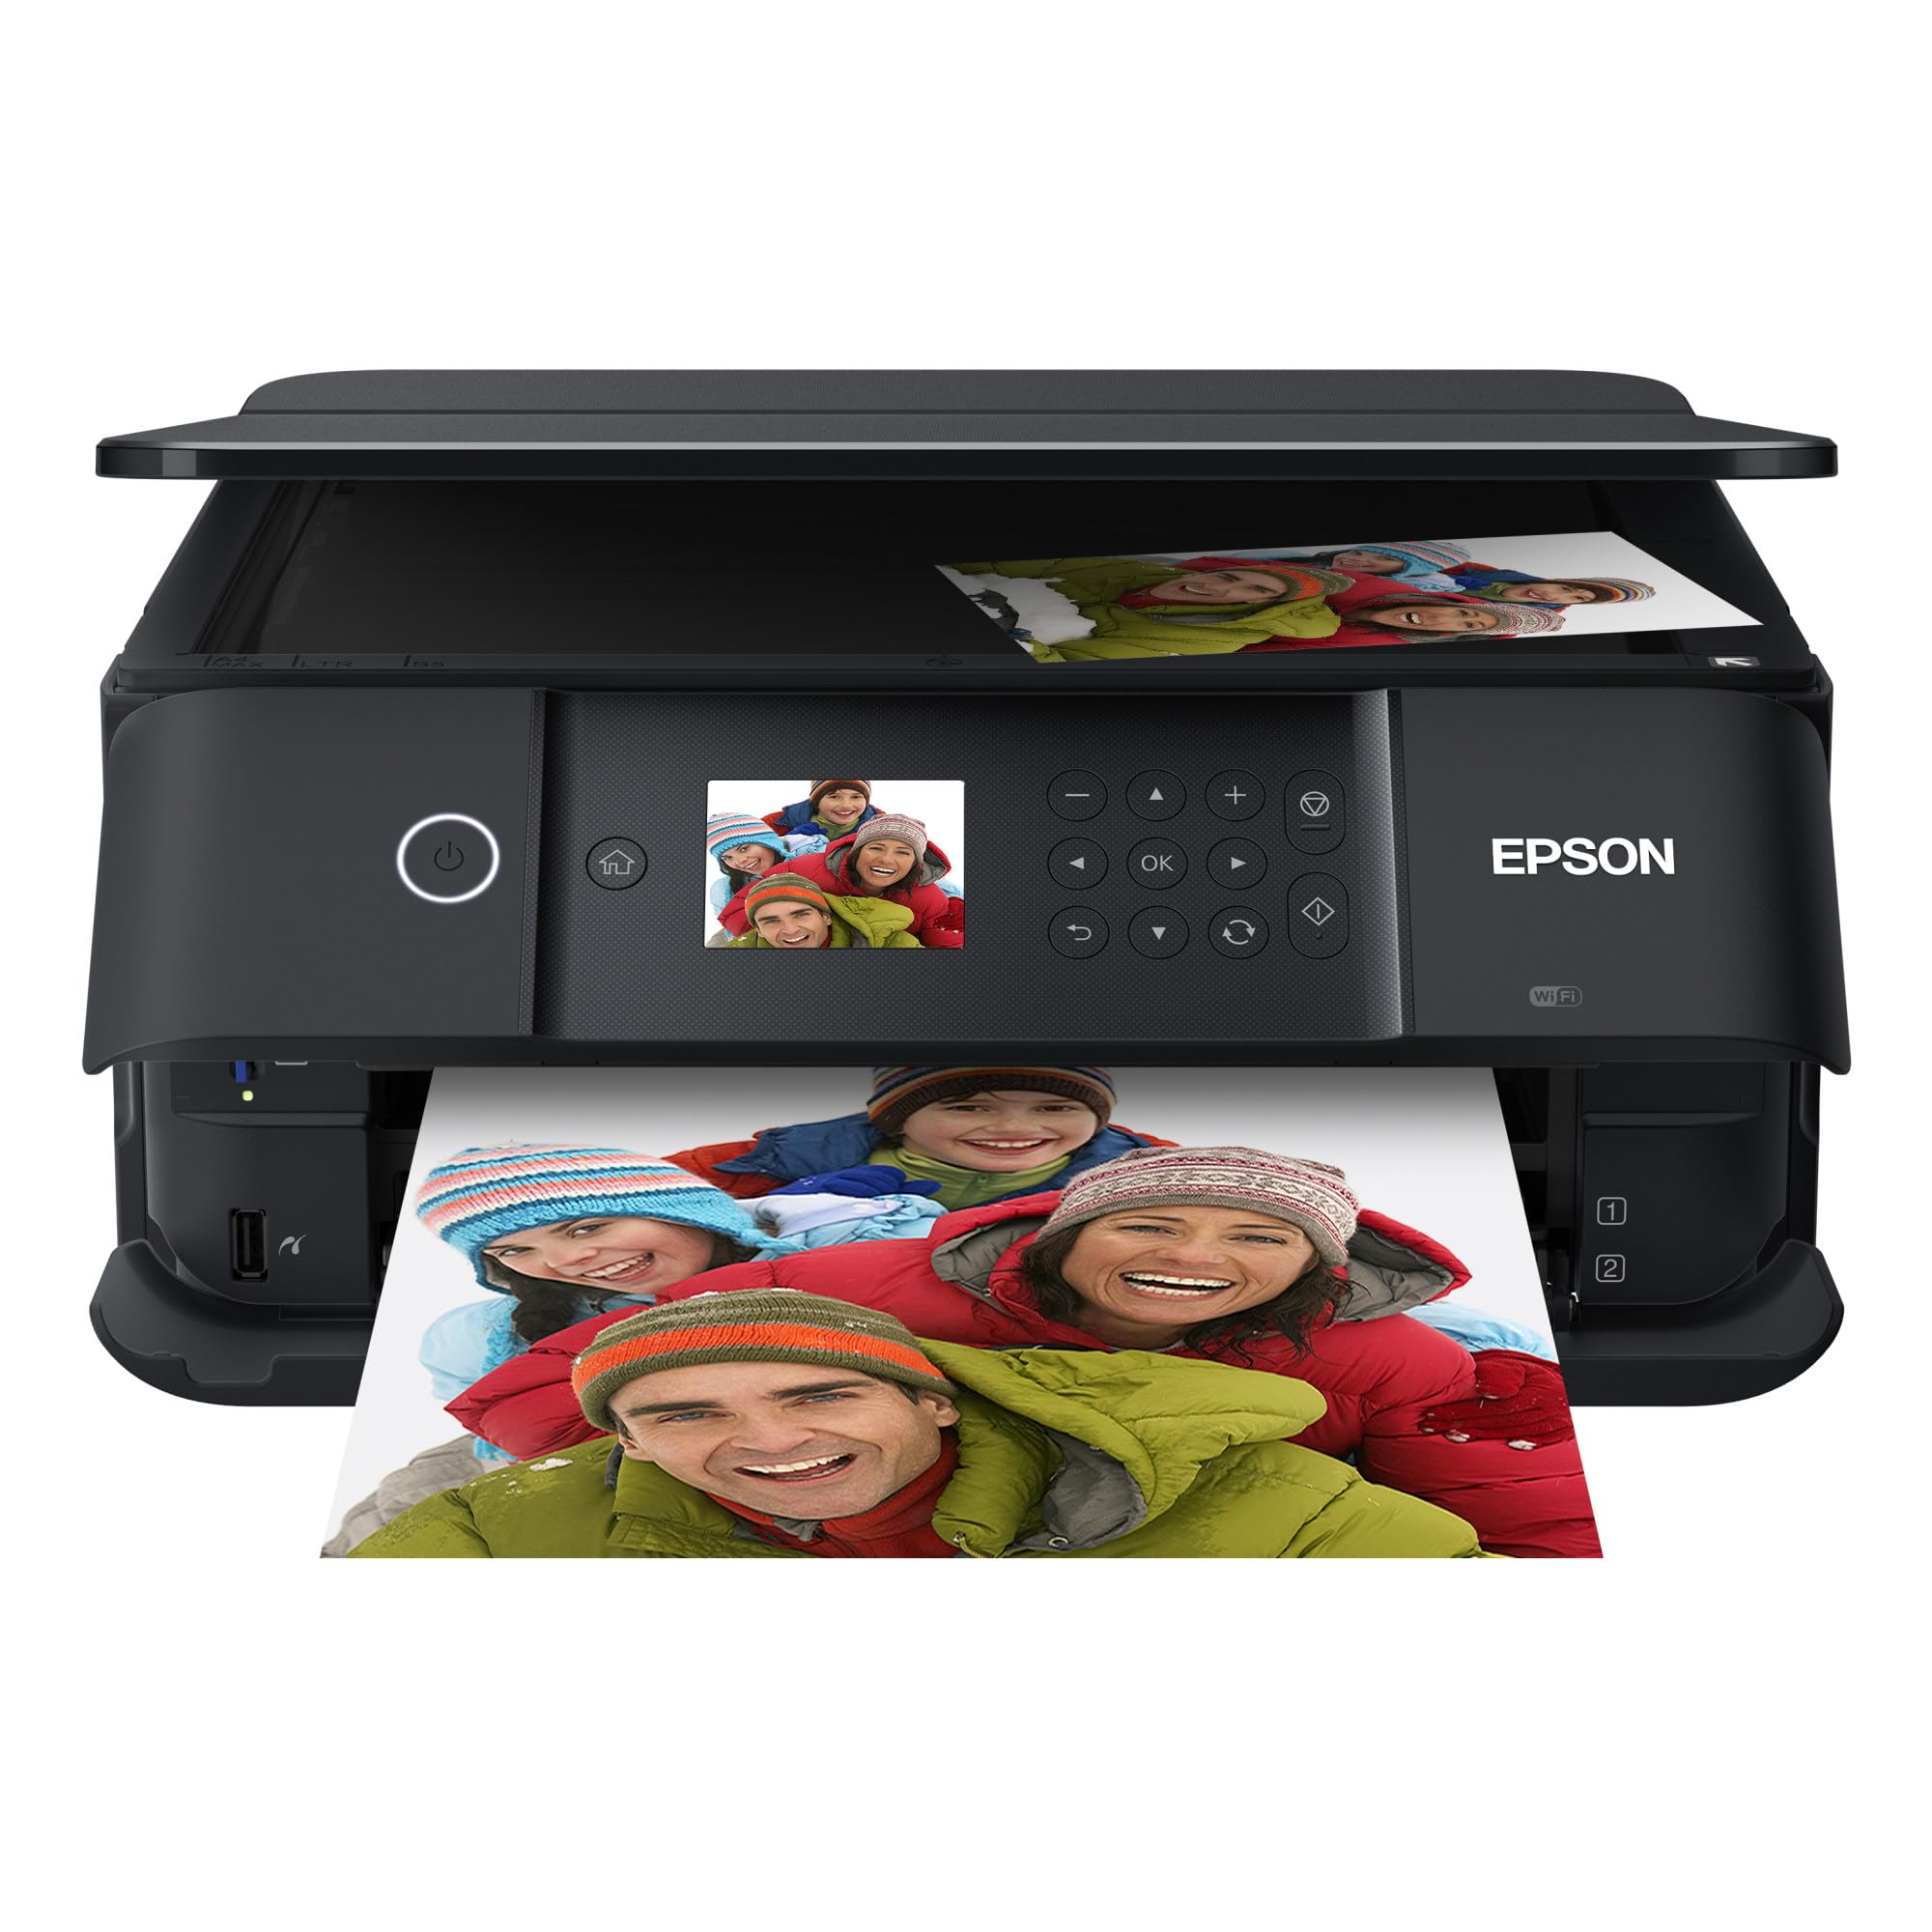 Epson Expression Premium Wireless Color Photo Printer with ADF, Scanner and Copier, Black  - Like New